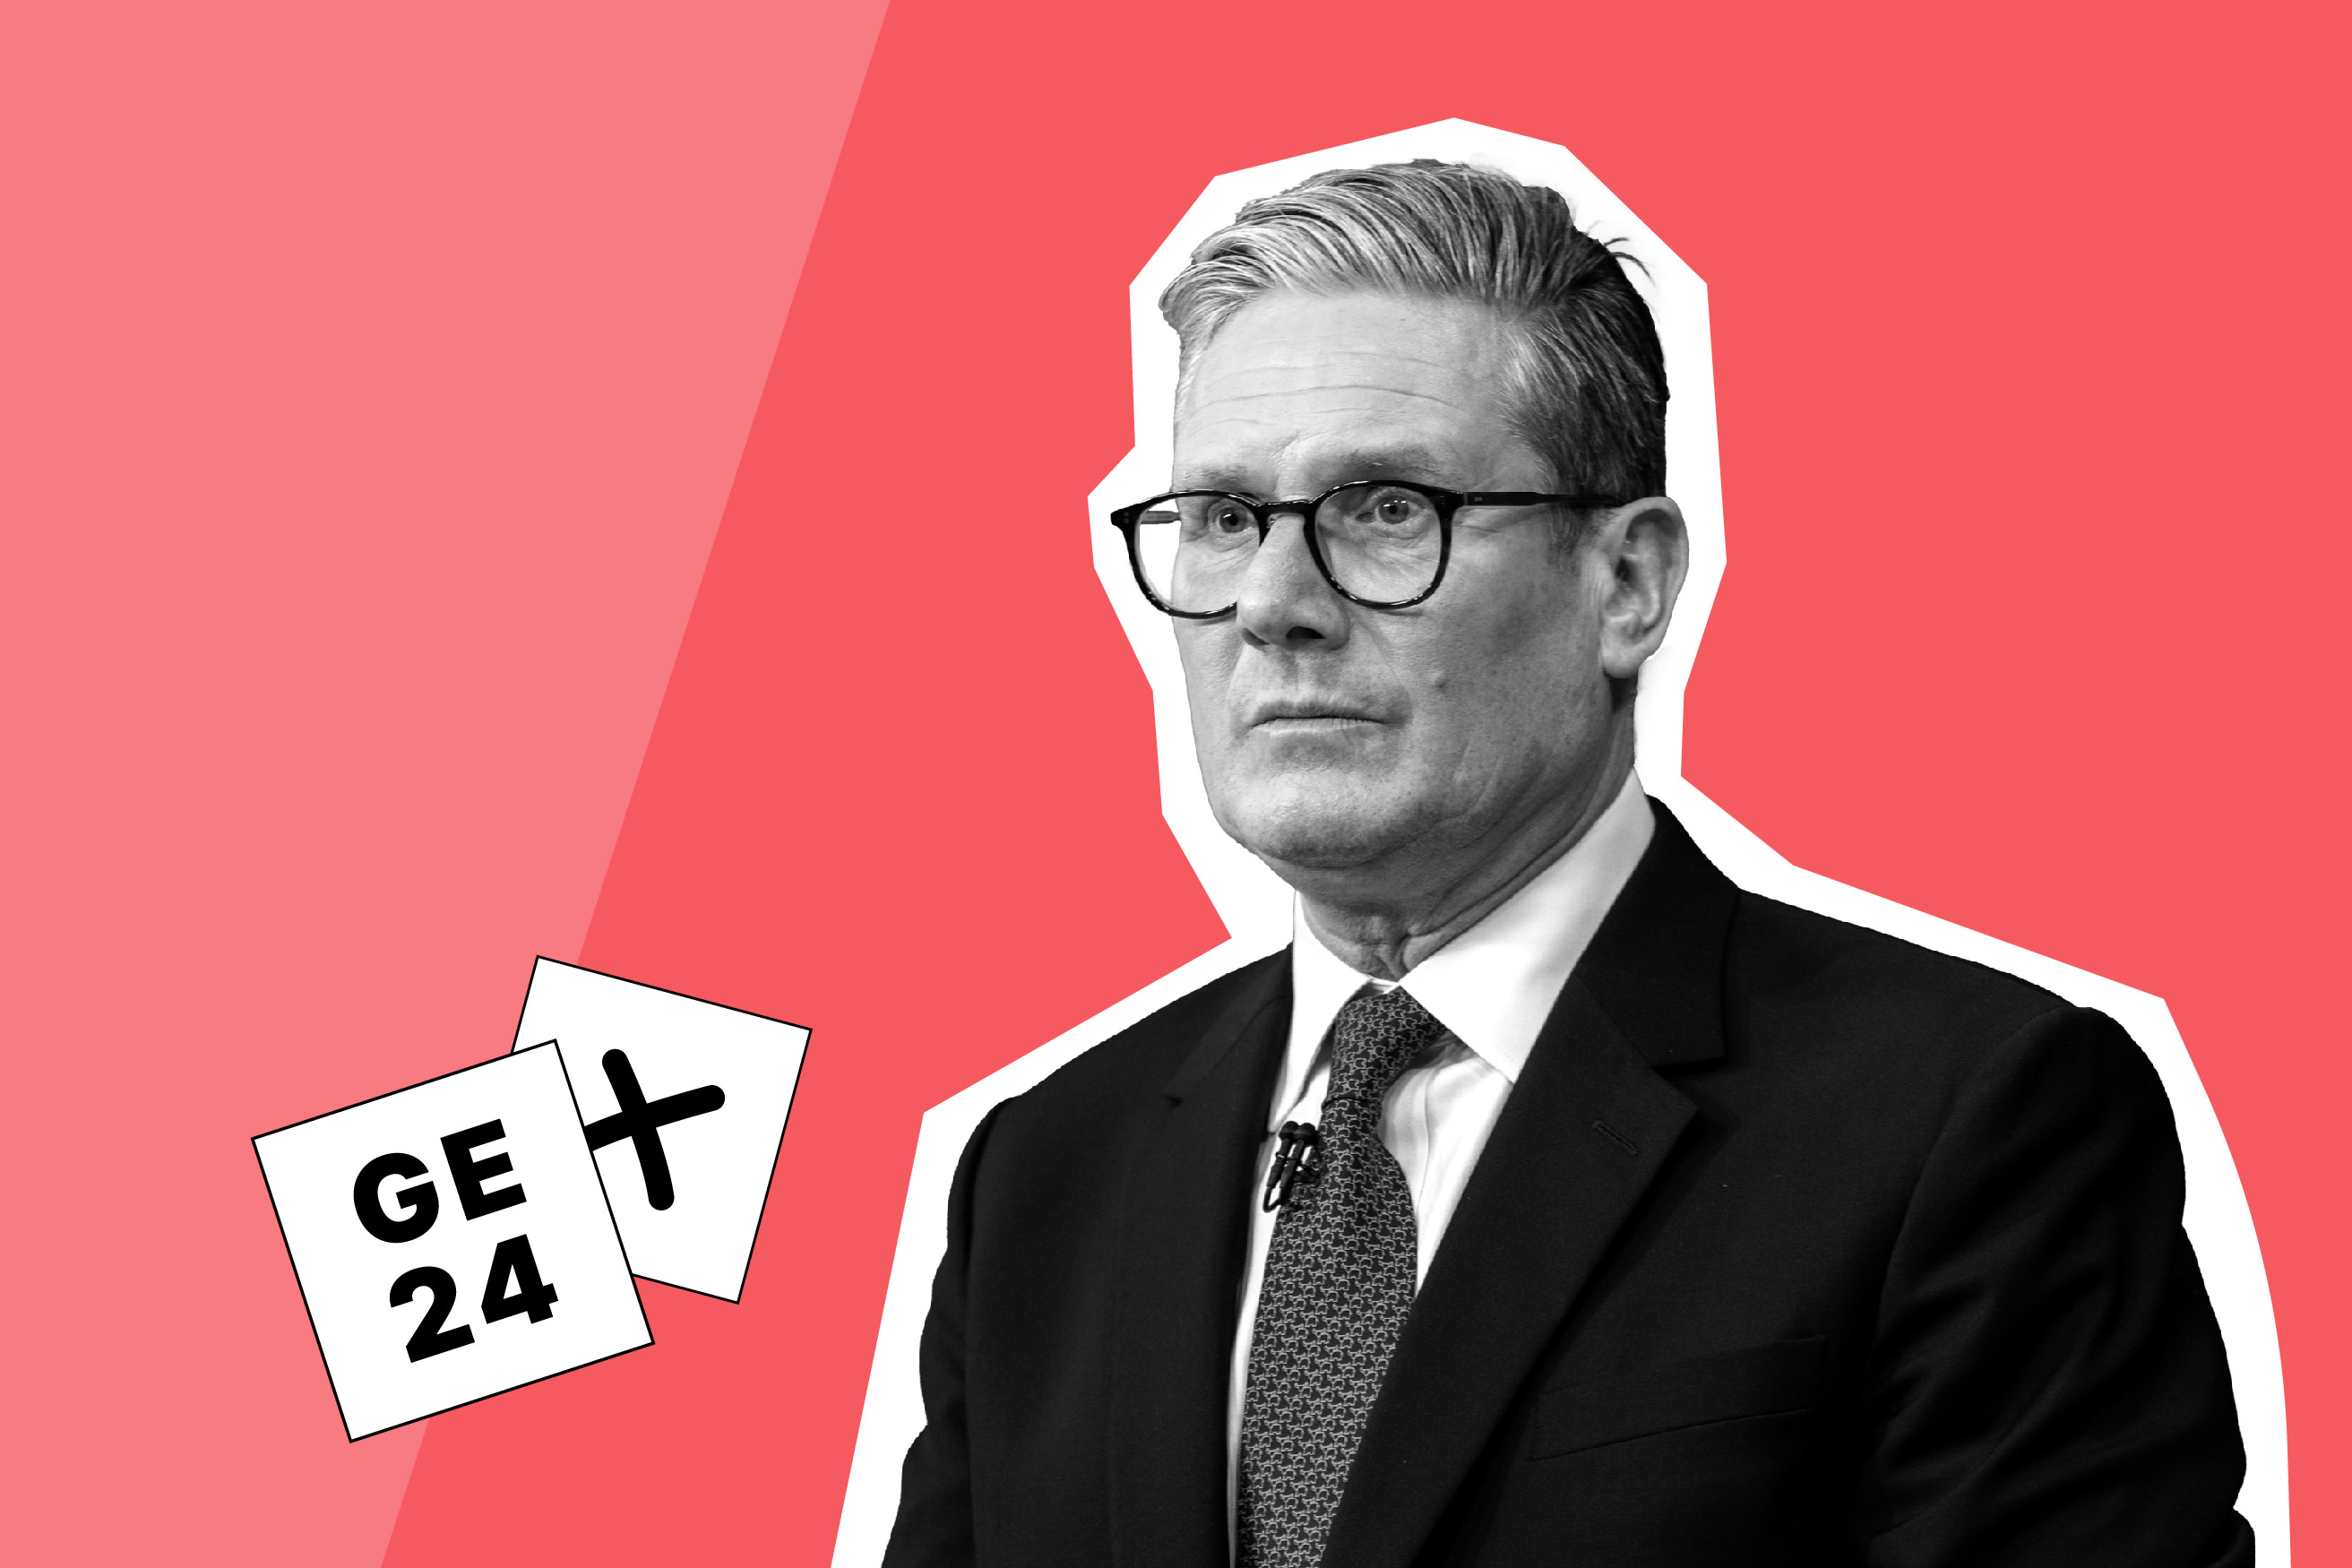 Keir Starmer cutout on a red background. Image credit - Alison Jackson via Getty Images